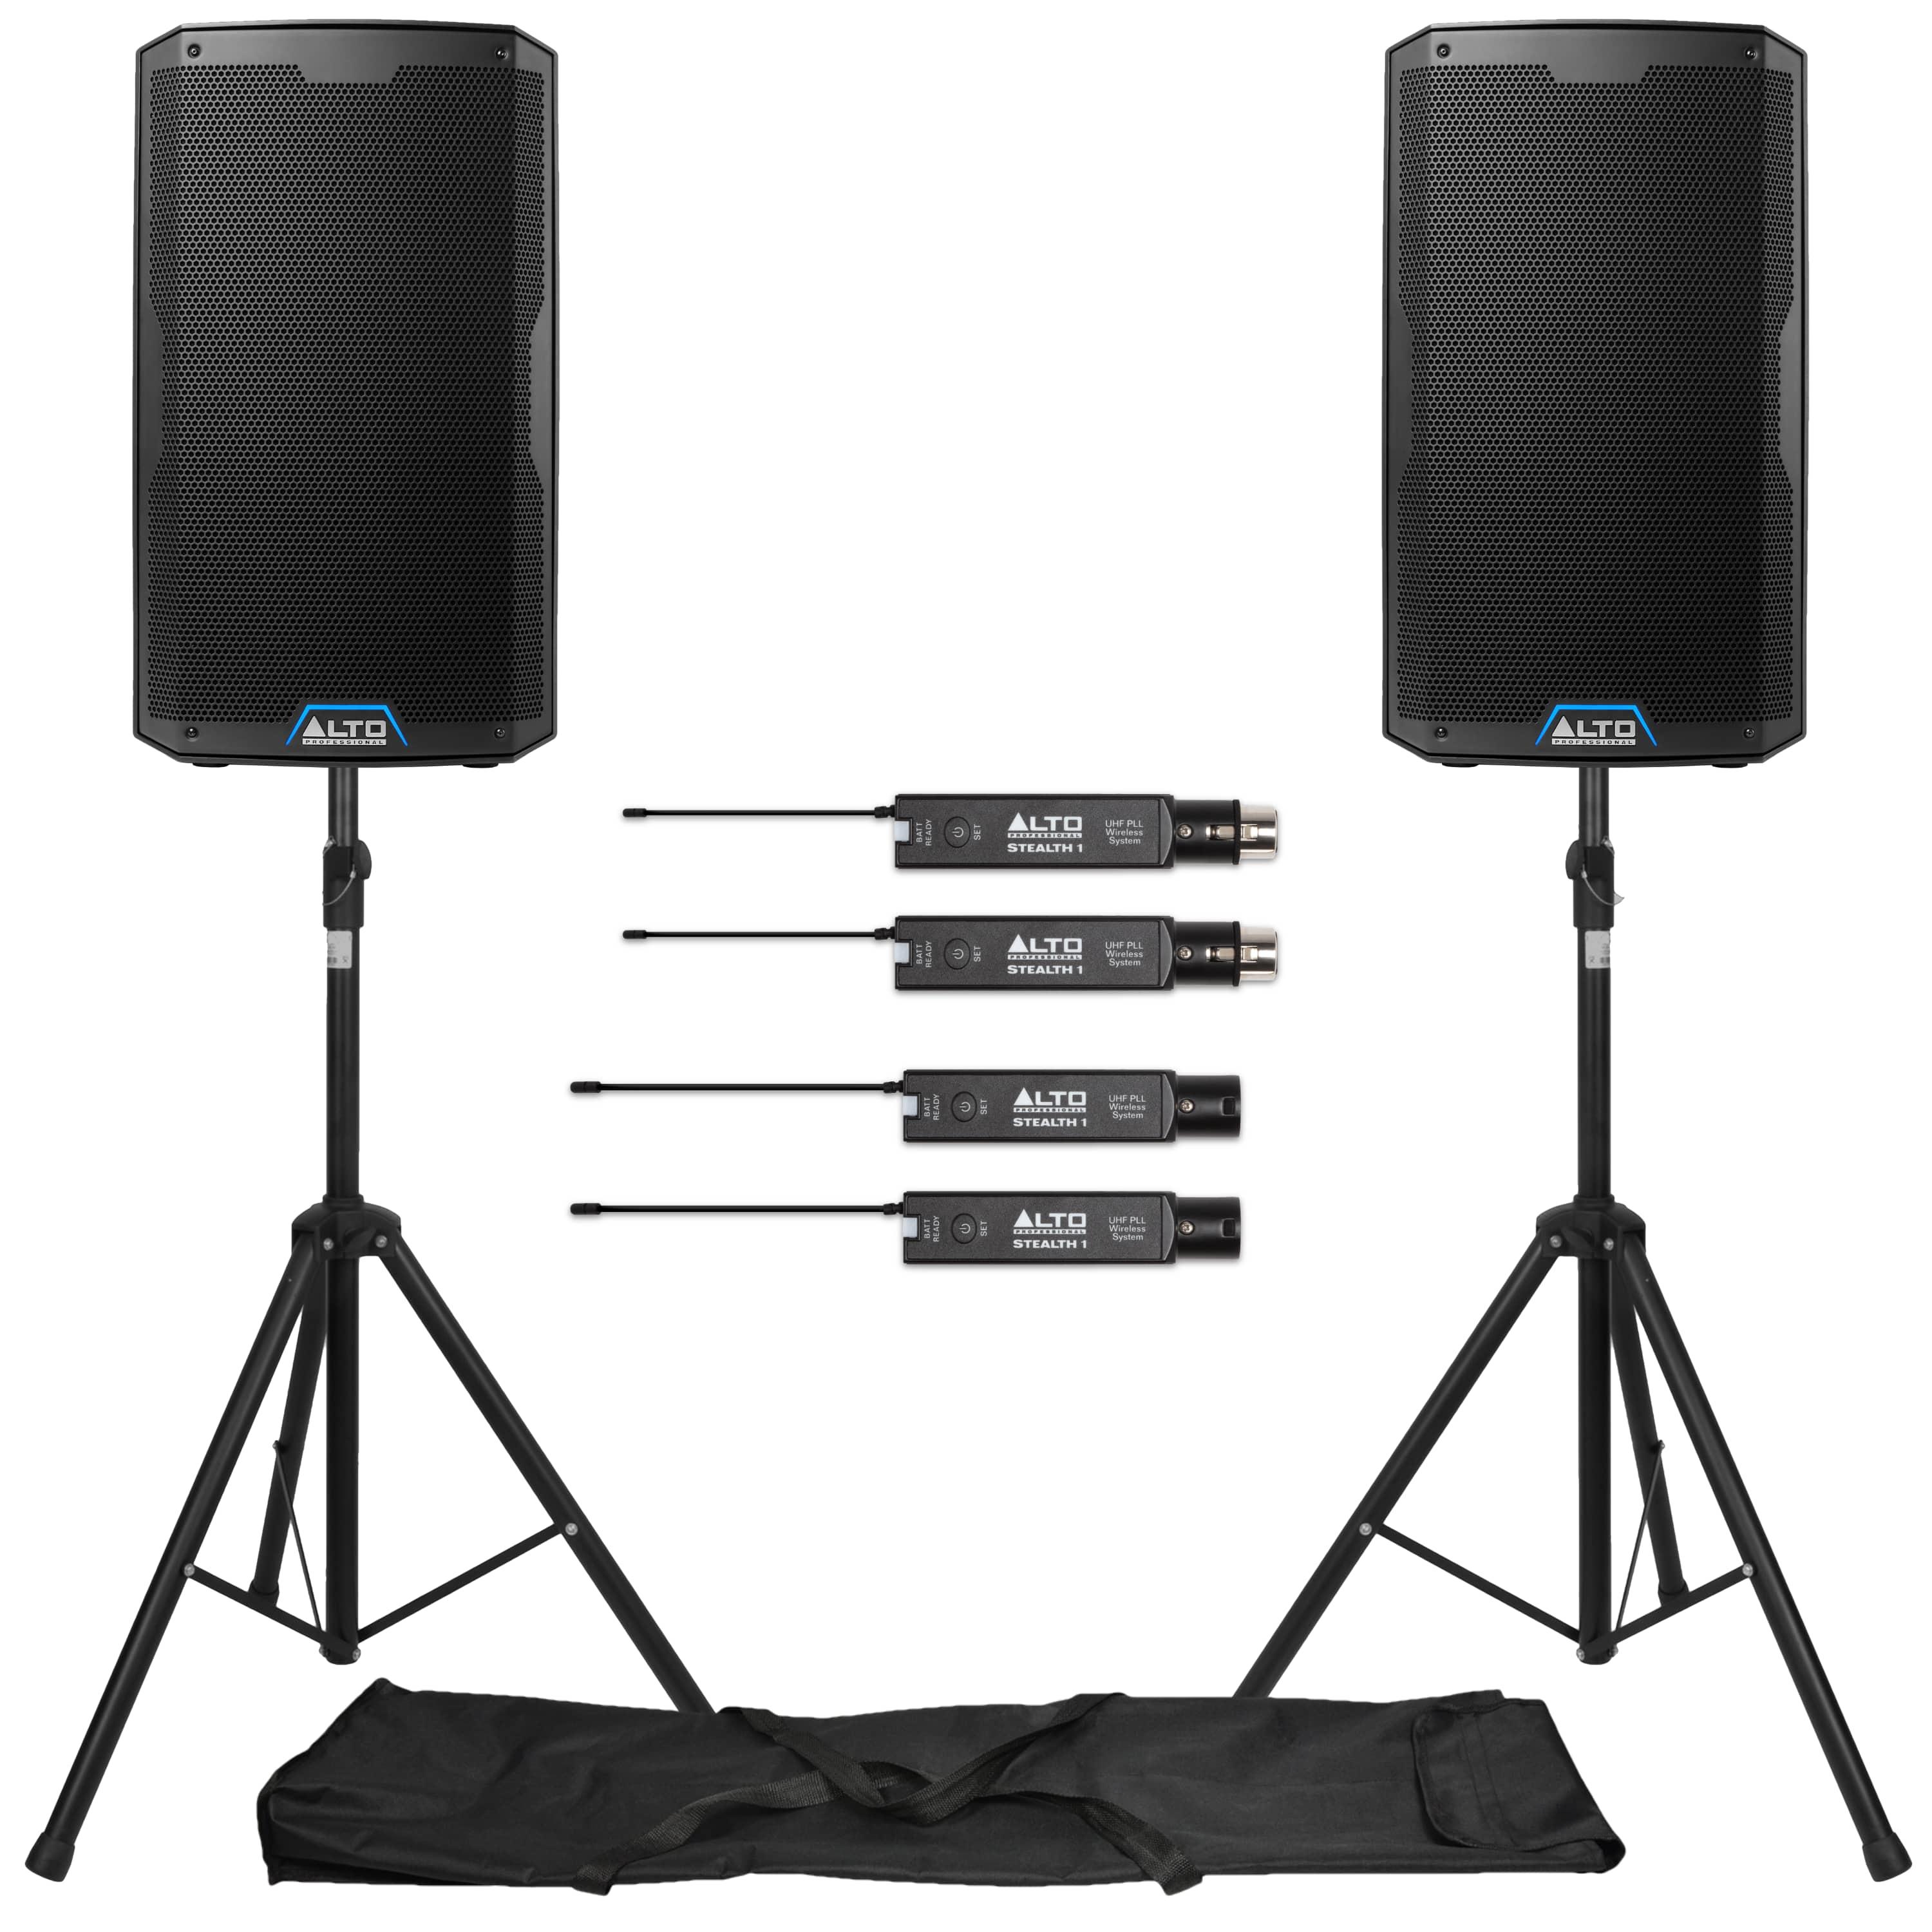 Alto Professional TS412 Wireless Package